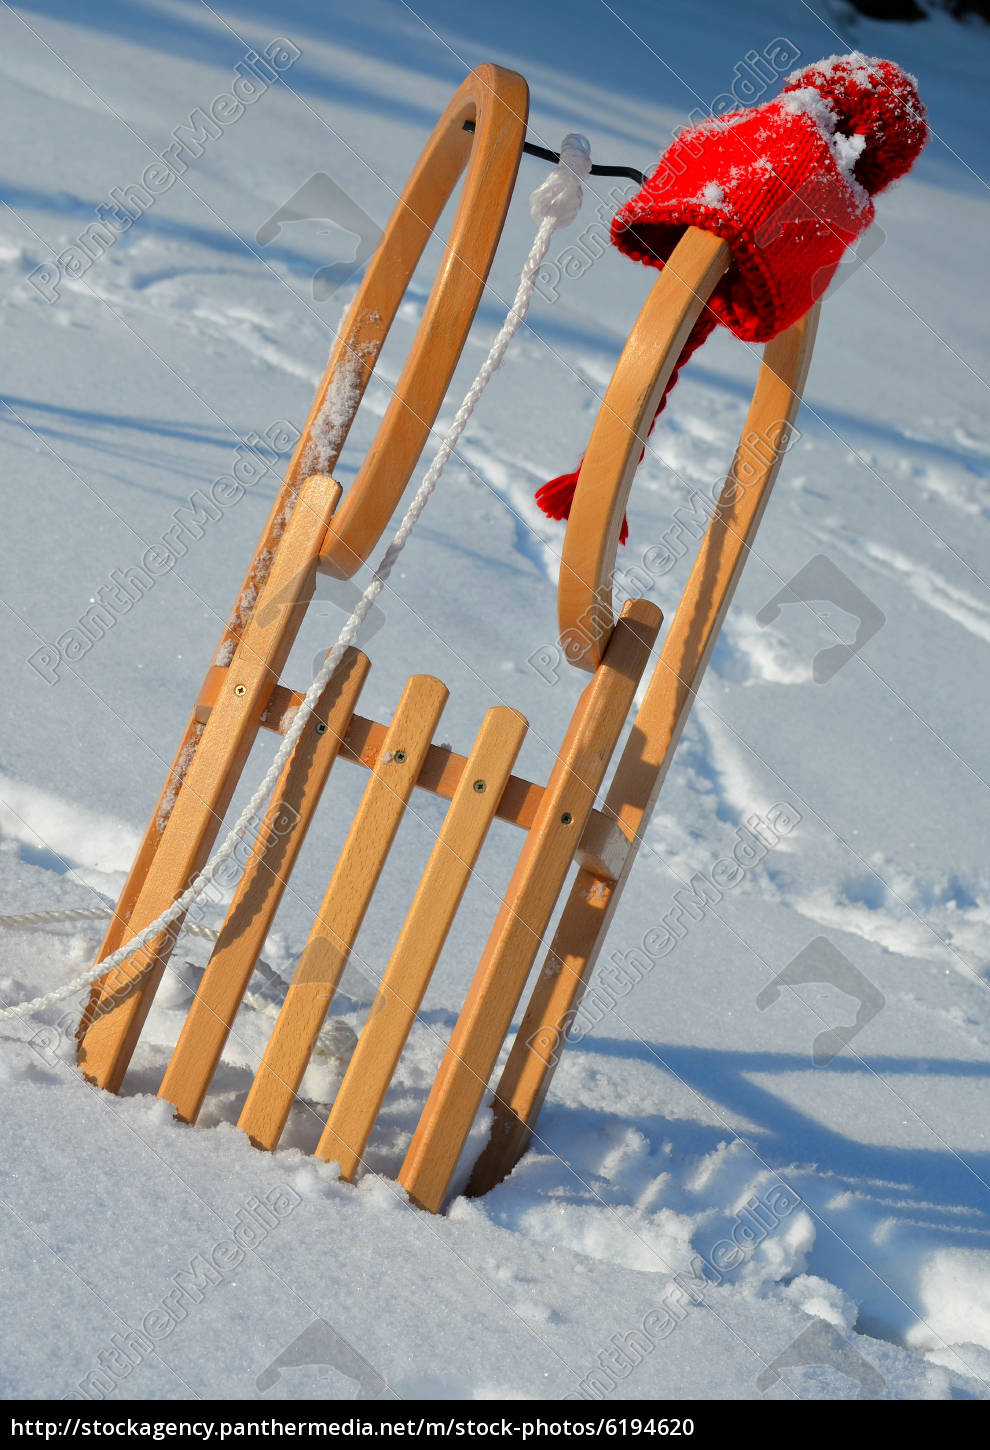 sled in the snow in winter - Royalty free photo #6194620